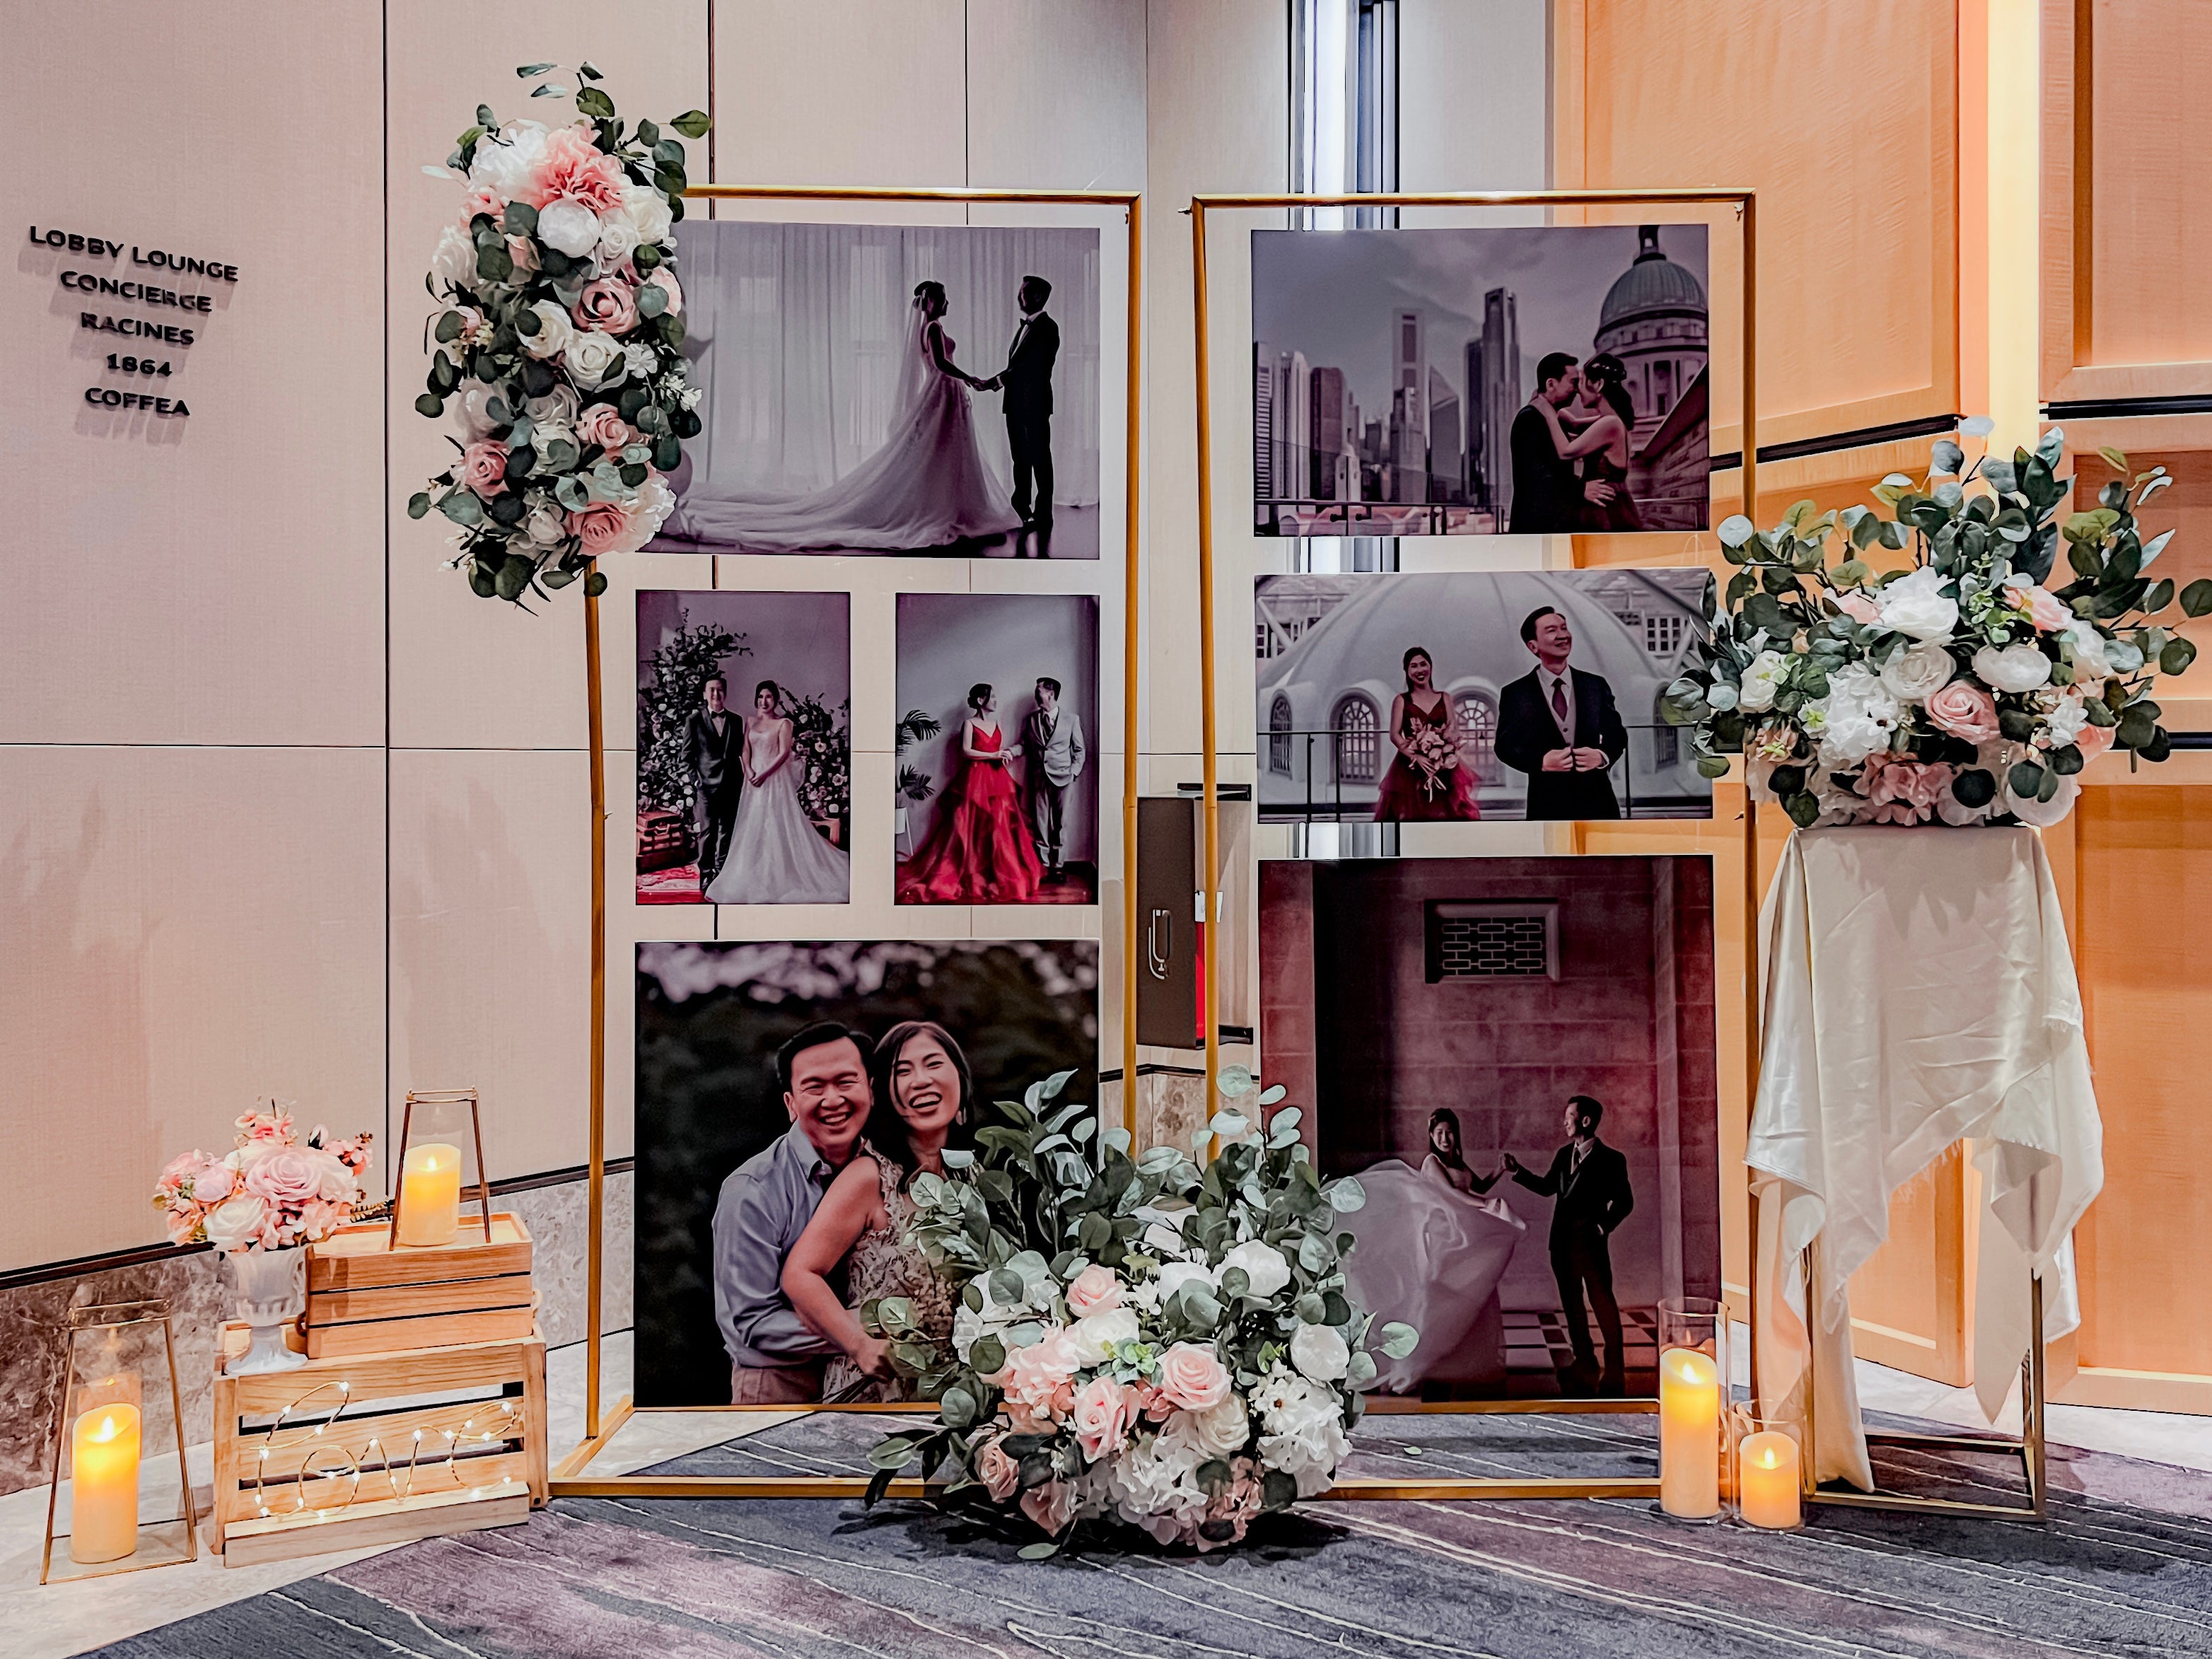 Wedding Reception Decor in Singapore - Multi-stands Photo Gallery with Pink & White Florals (Venue: Sofitel Singapore City Centre)